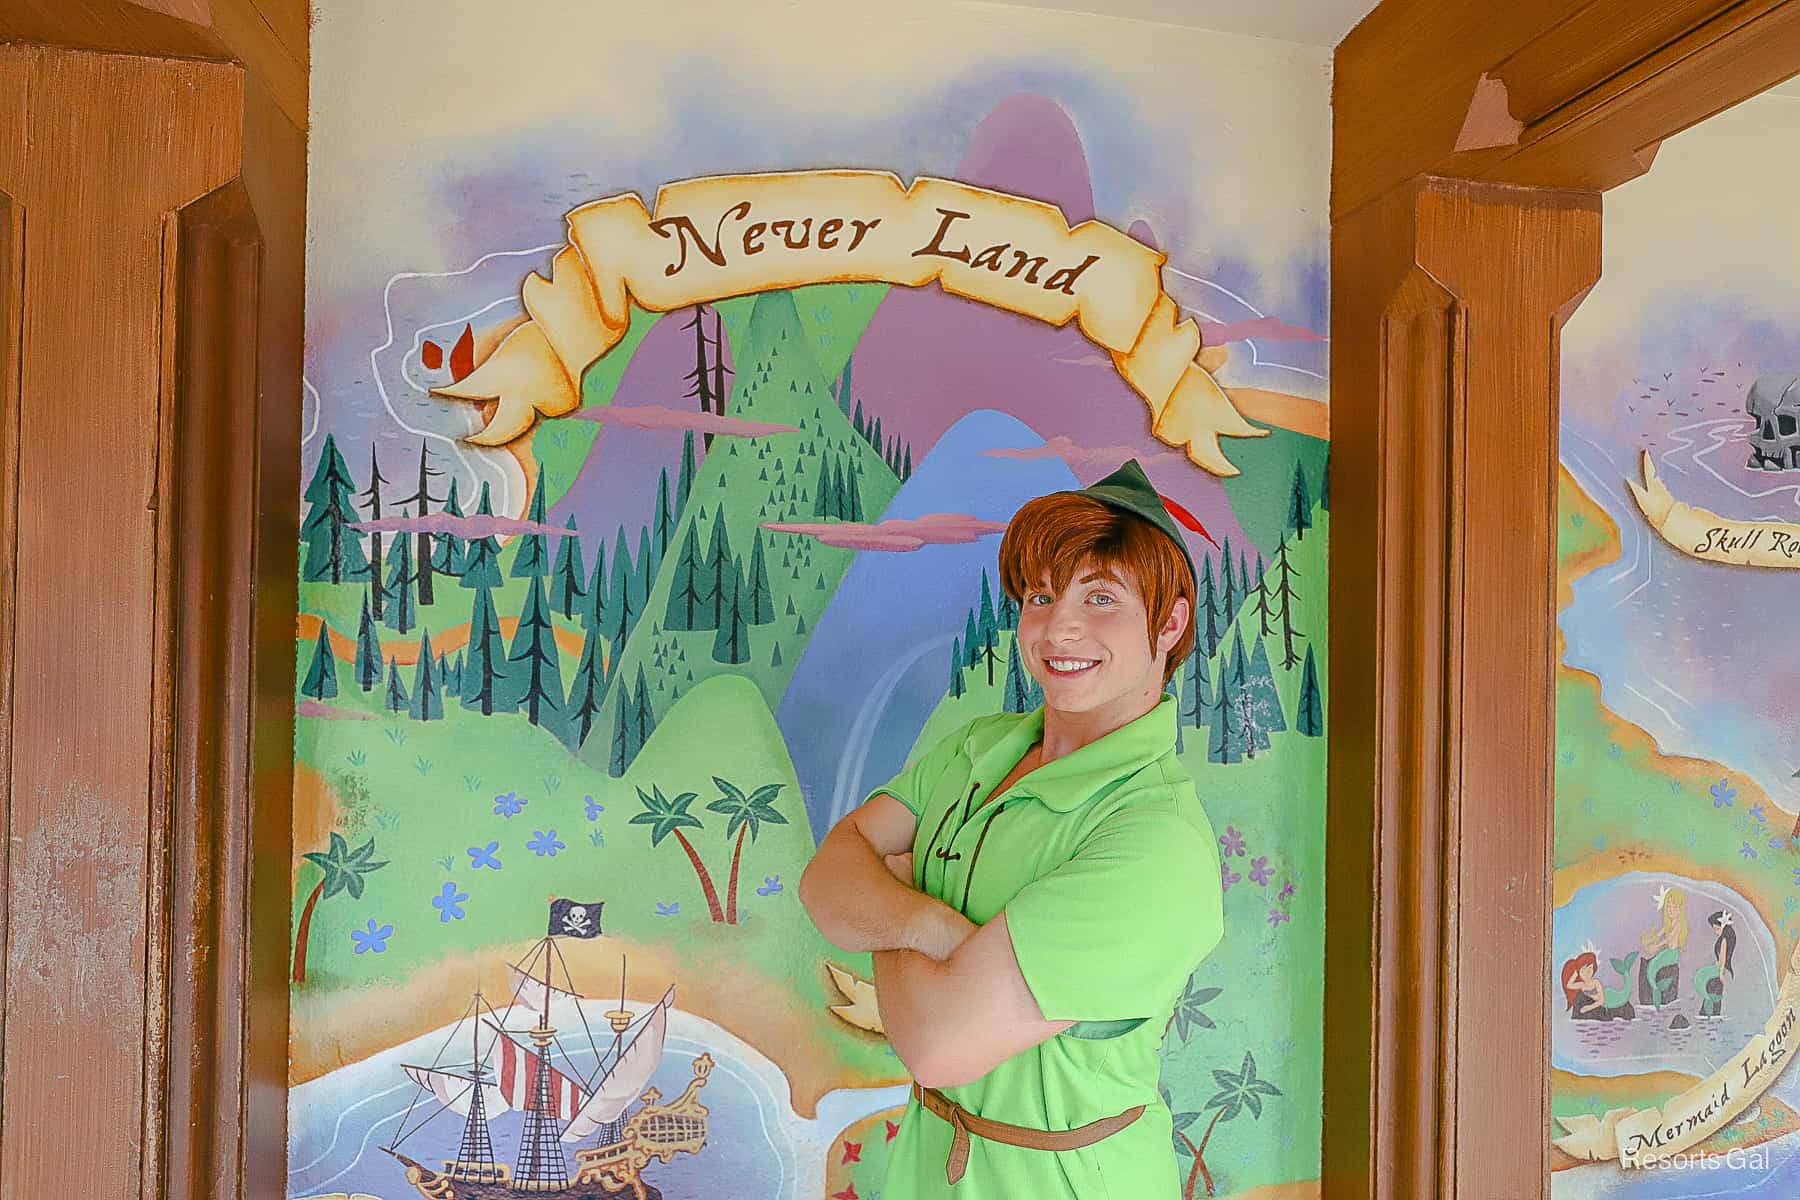 Peter Pan poses in front of the Never Land map at Magic Kingdom. 